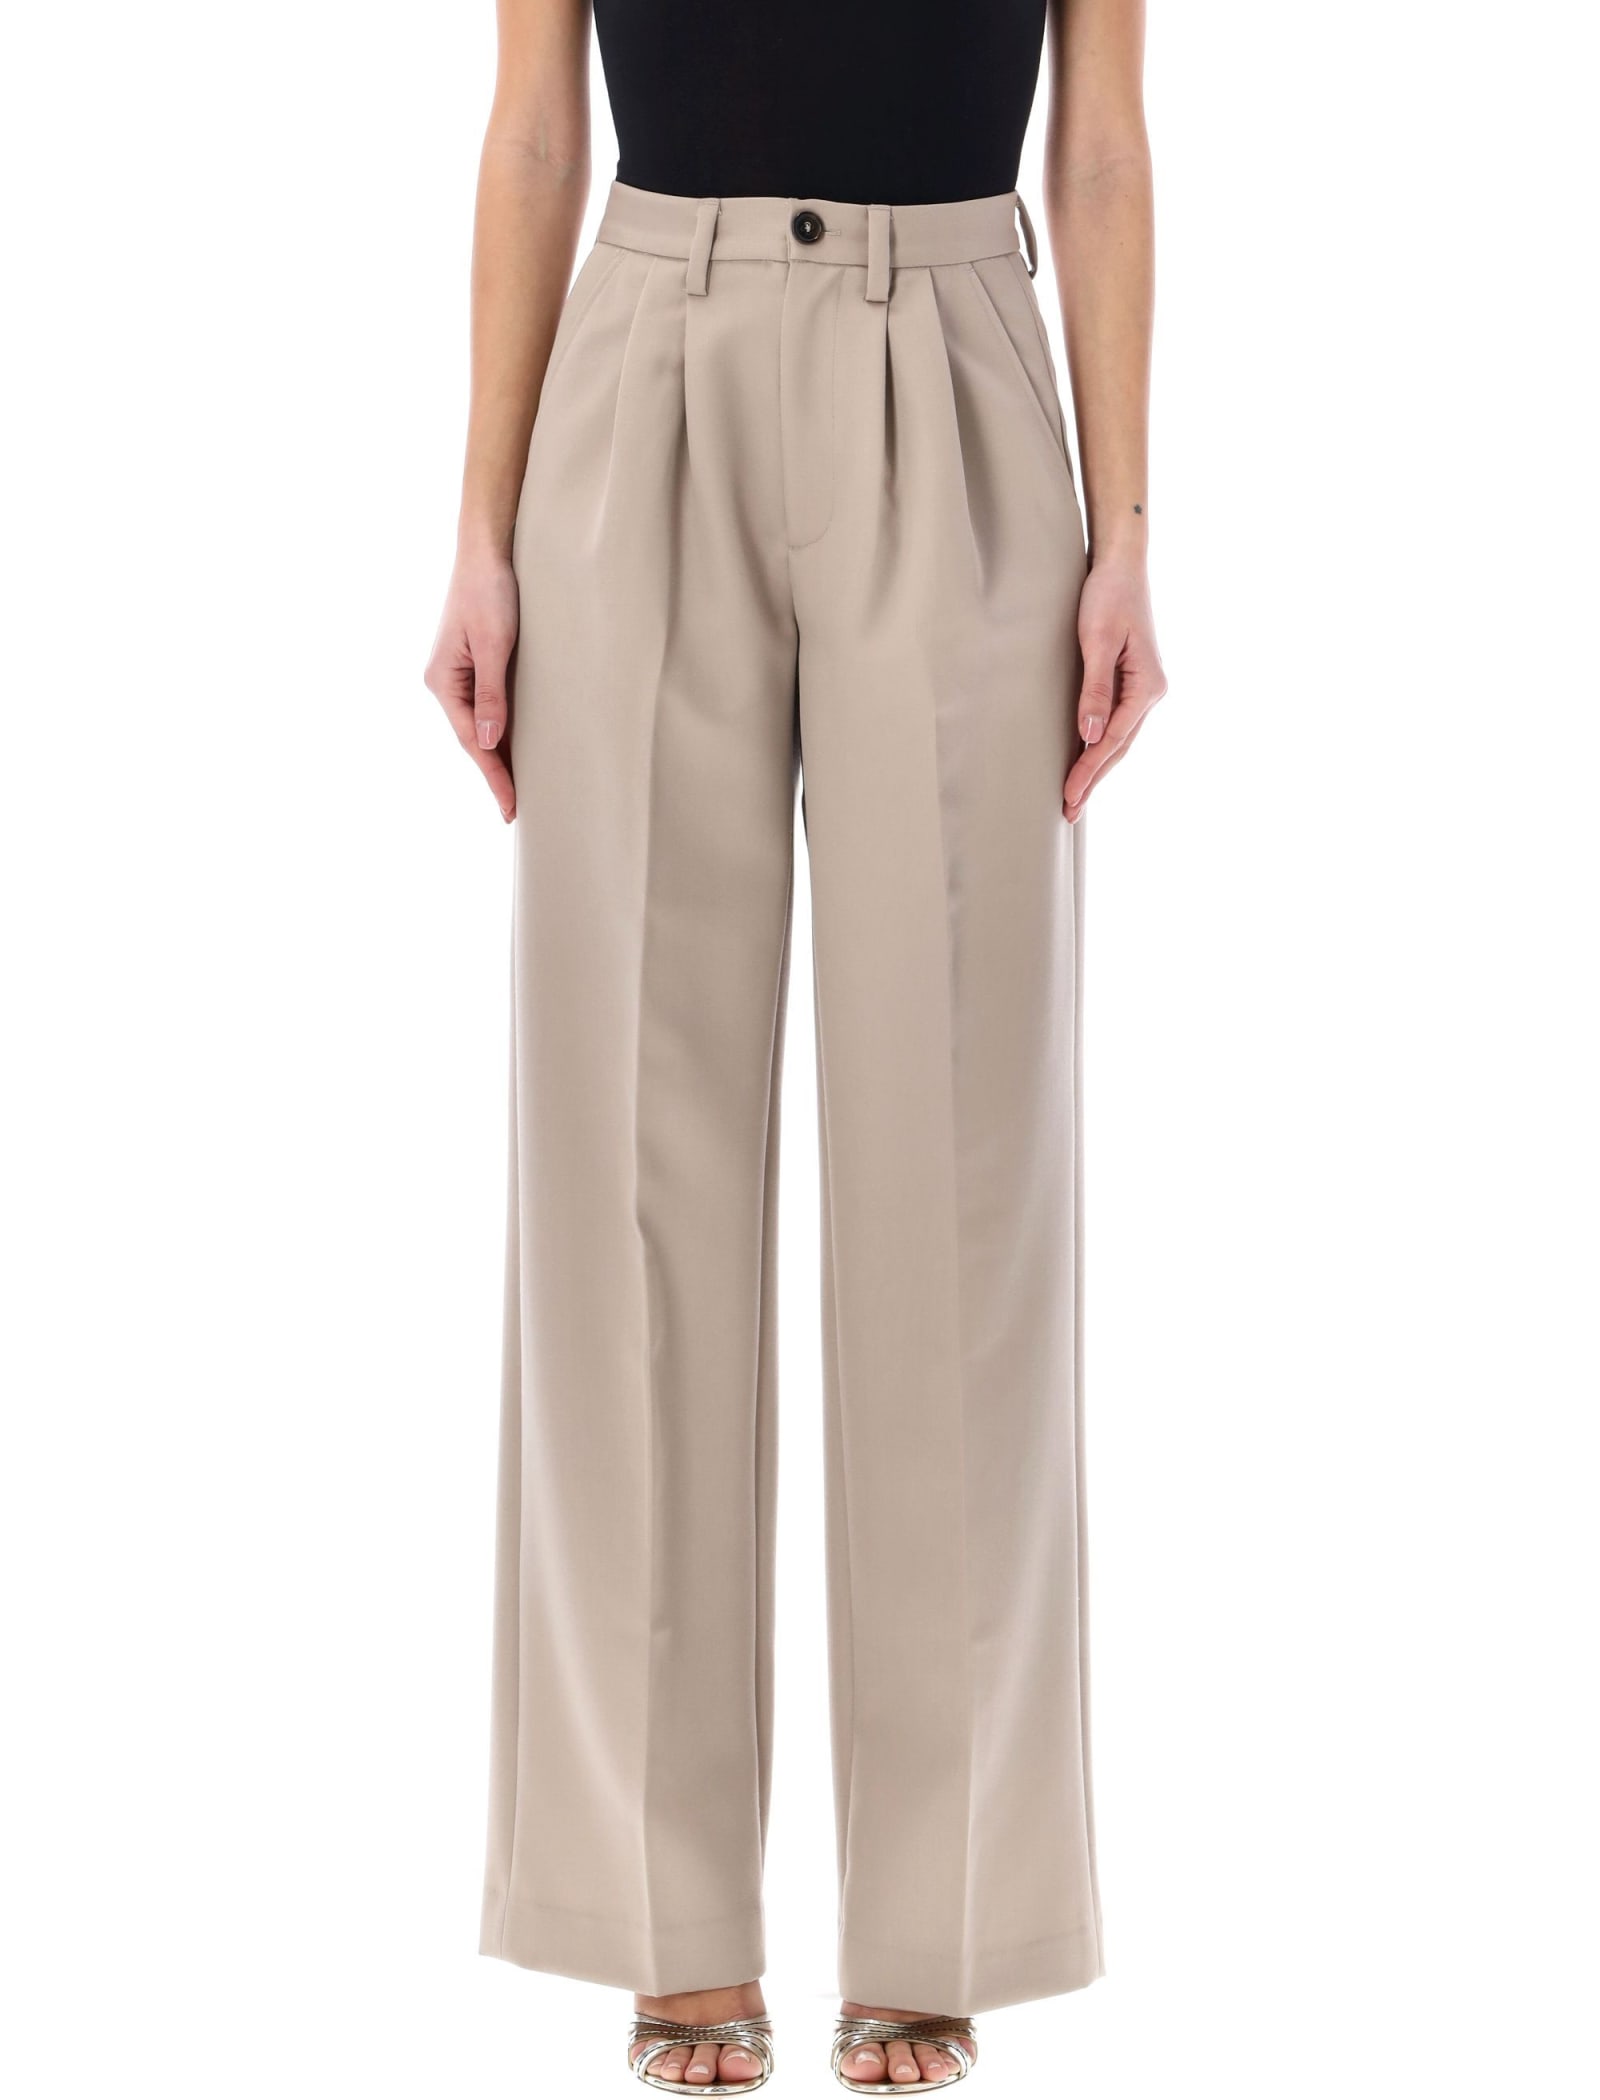 Carrie Pant